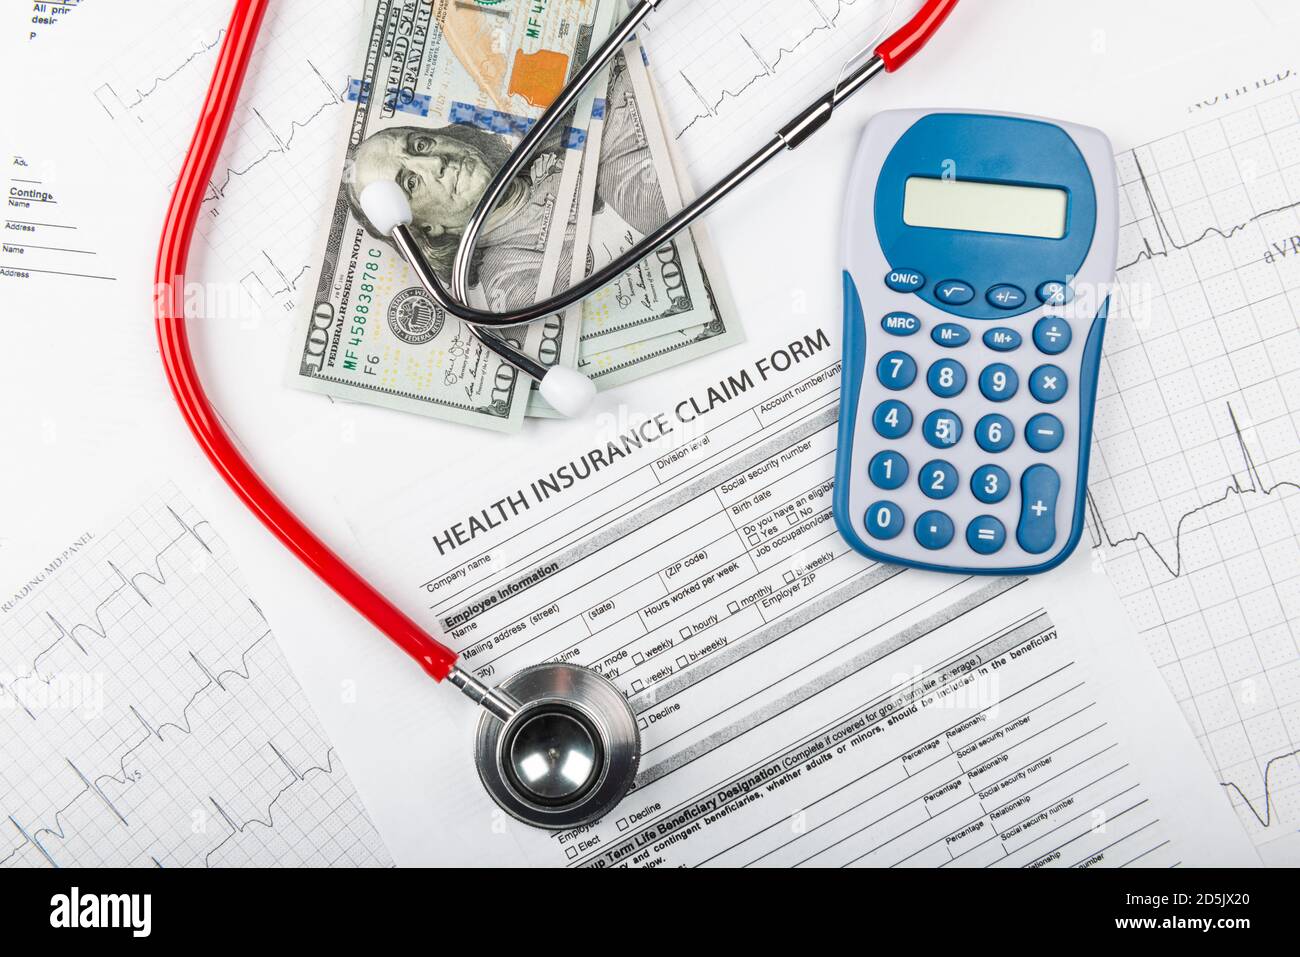 Health care costs. Stethoscope and calculator symbol for health care costs or medical insurance Stock Photo